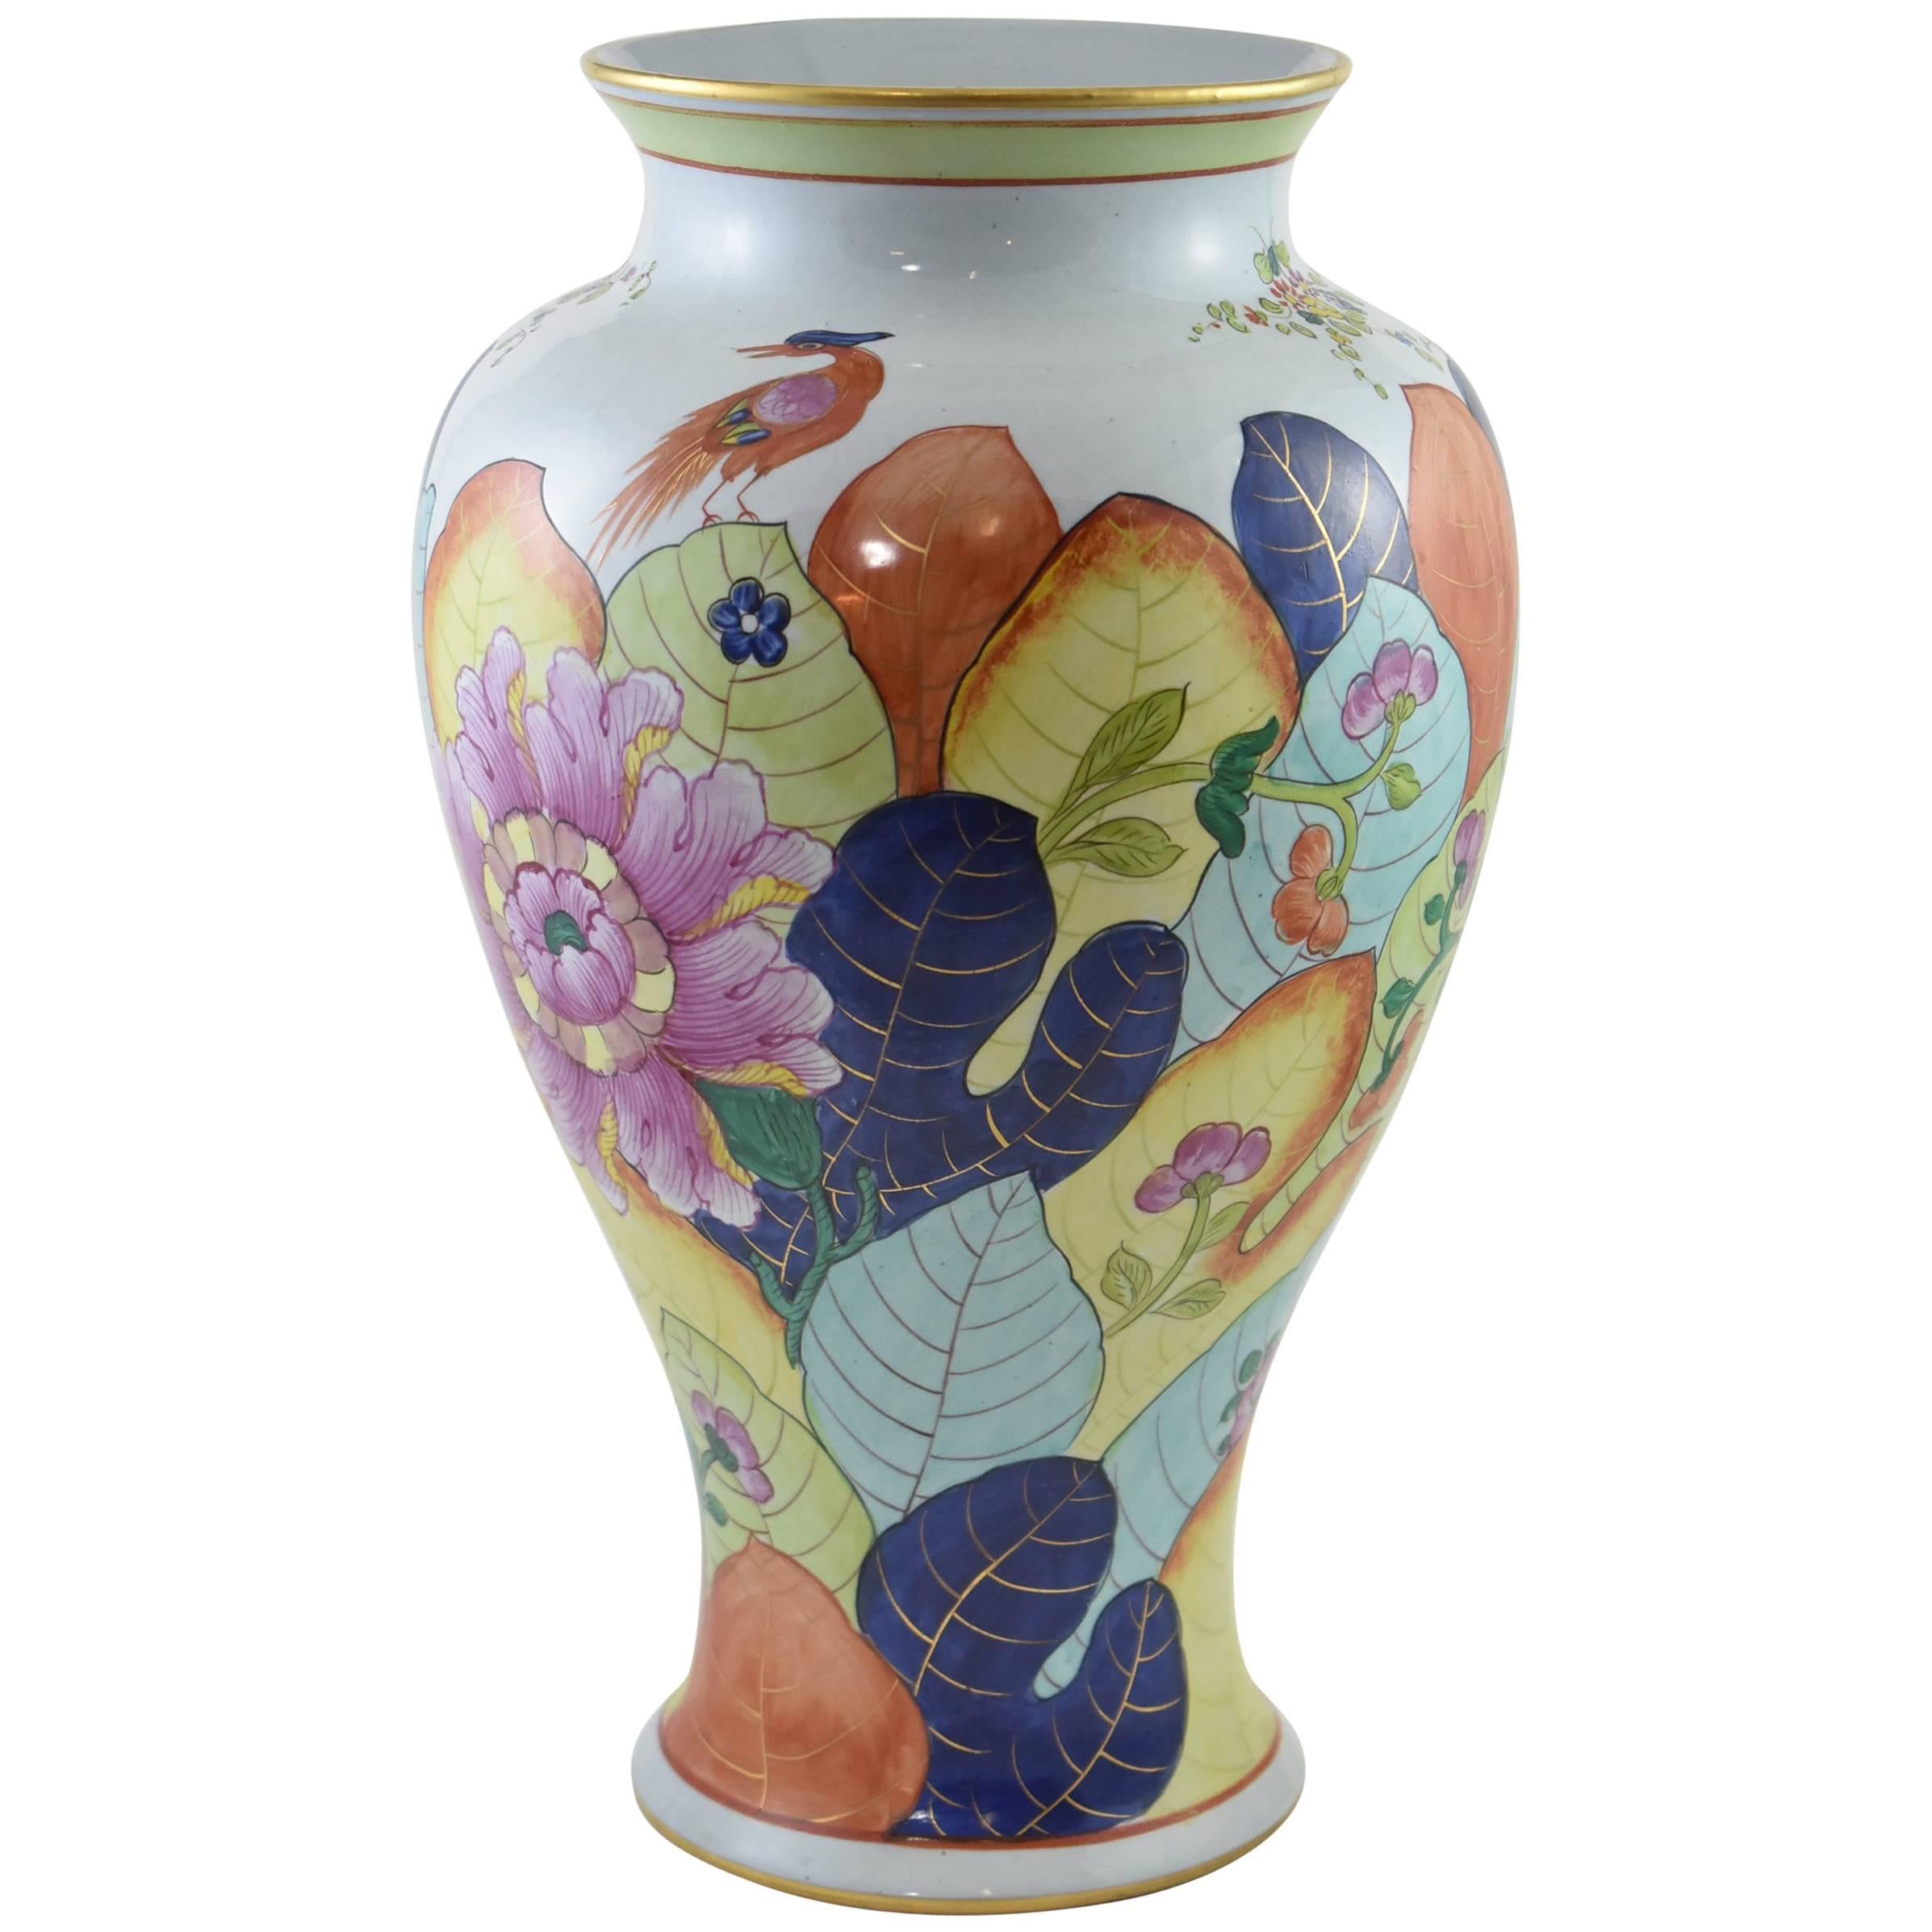 Hand-Painted Italian Vase in the Tobacco Leaf Pattern Attributed to Mottahedah